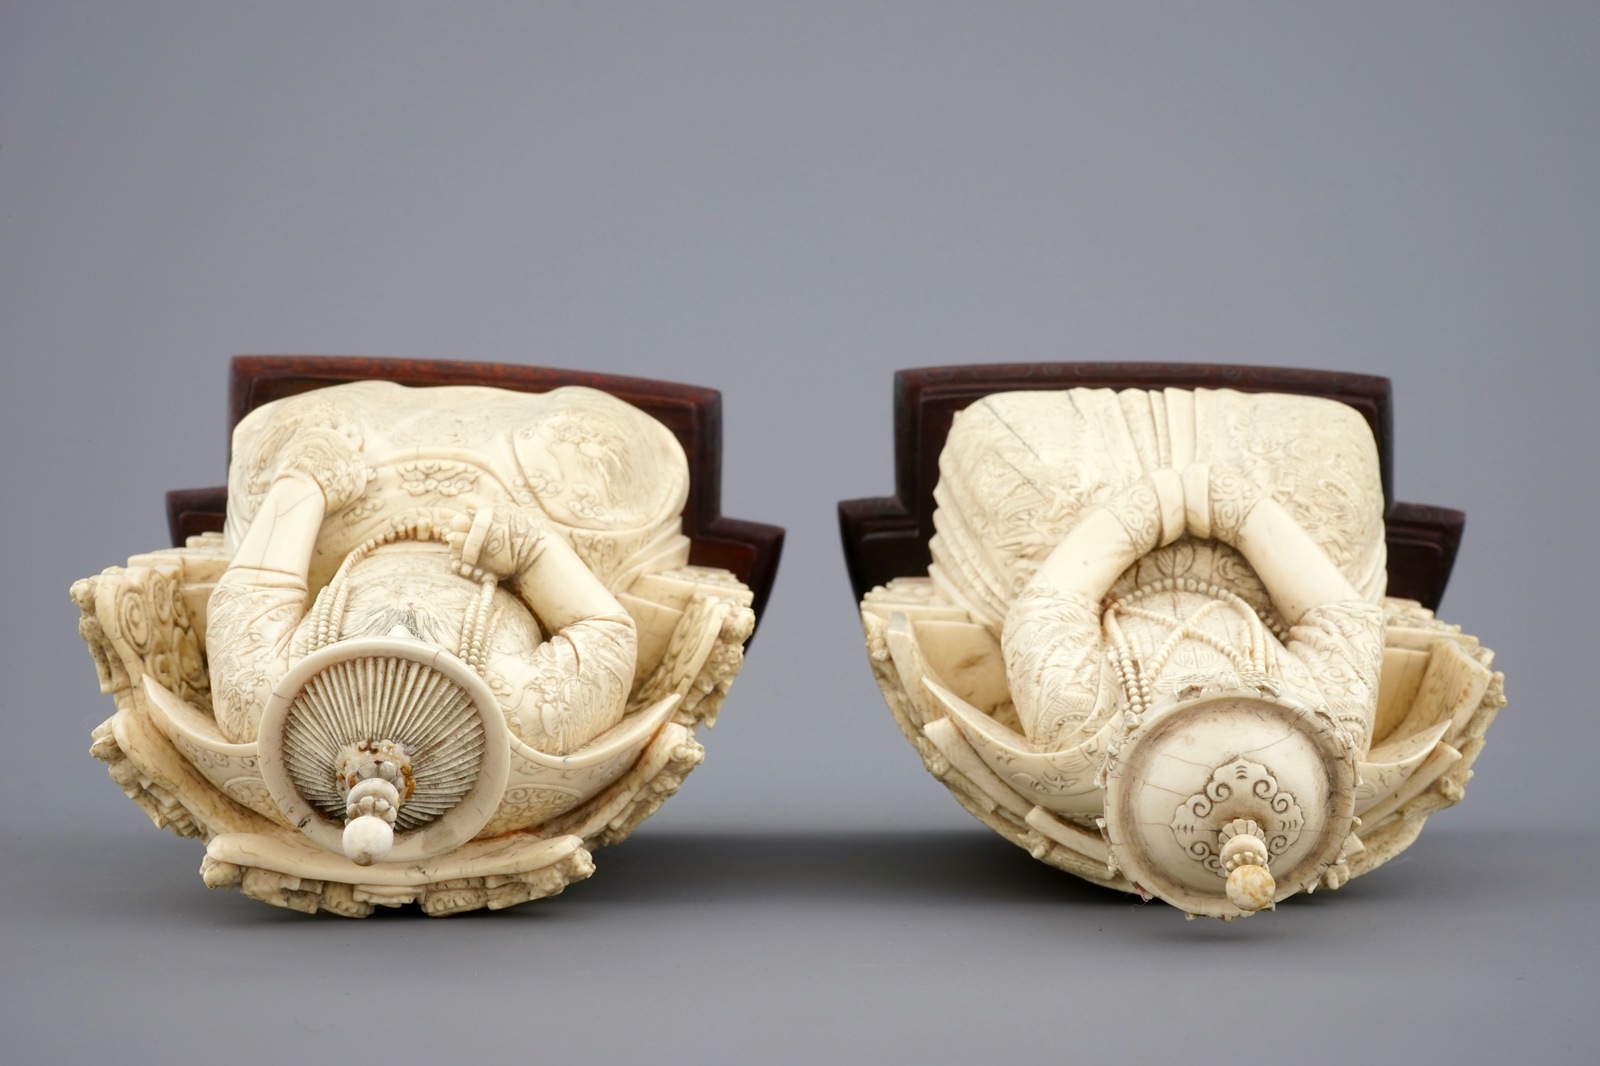 A pair of Chinese ivory figures of the emperor couple seated on a throne, ca. 1900 - [...] - Image 5 of 6